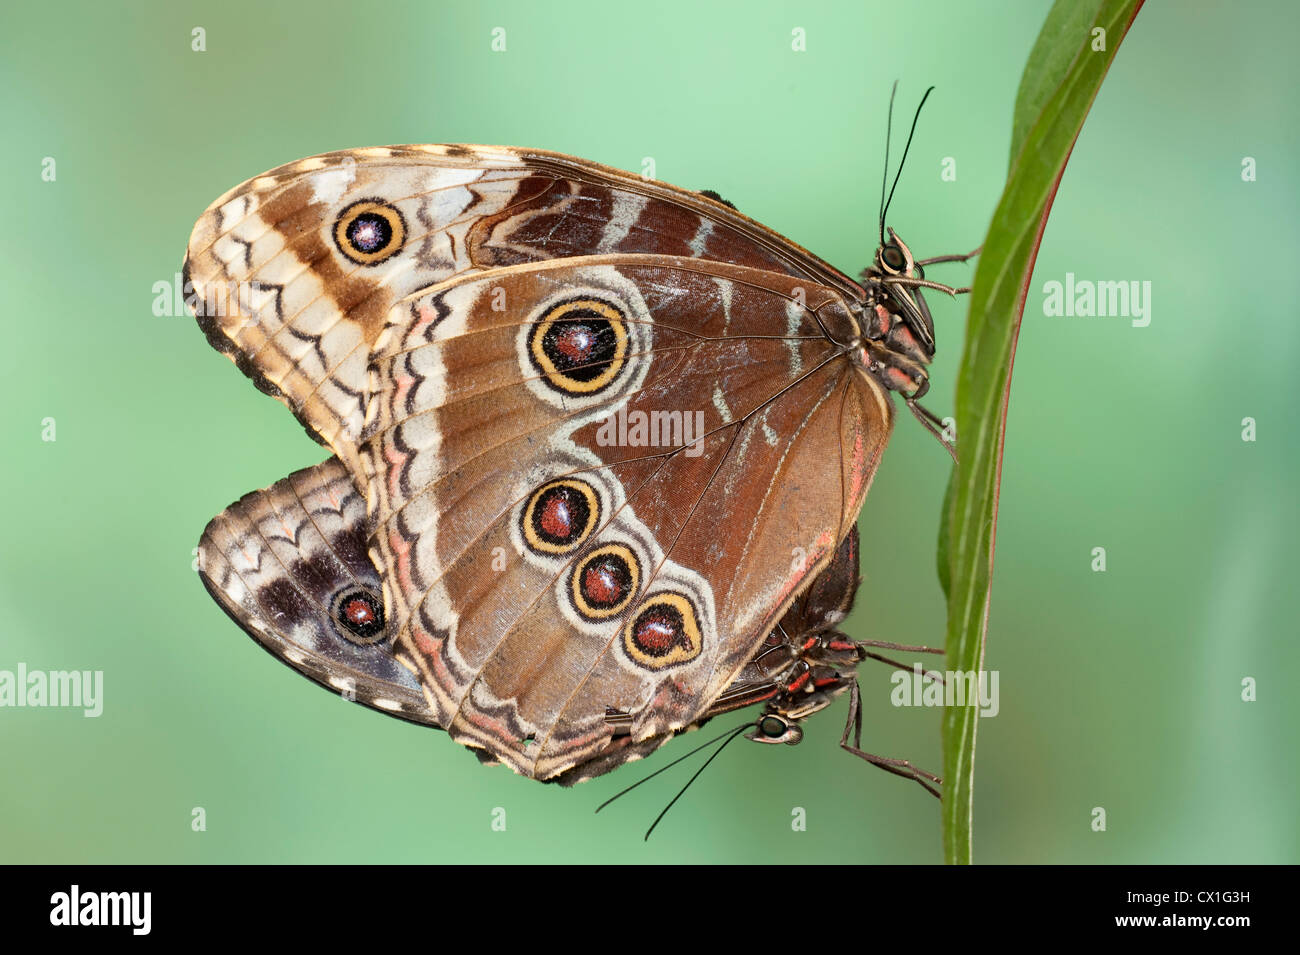 Blue Morpho Butterflies Mating Morpho peleides Central & South America pair together underside of wings eye spots rainforest Stock Photo